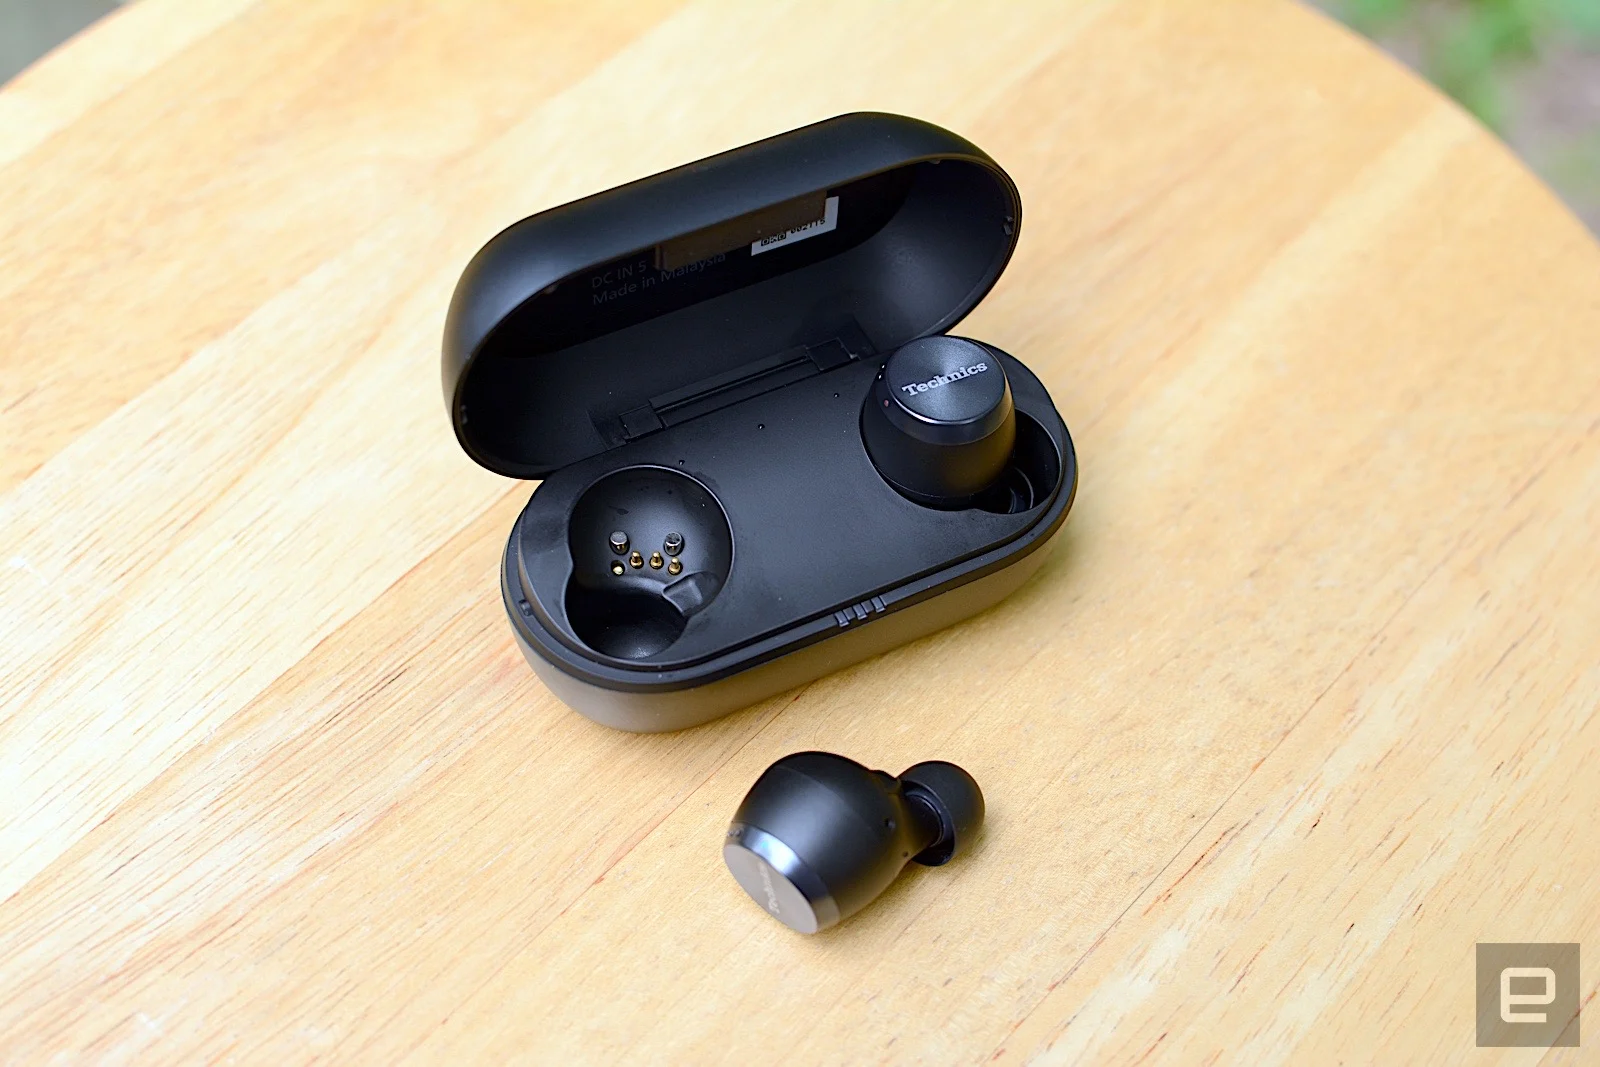 The Technics EAH-AZ70W true wireless earbuds do some things very well, but the audio quality can be hit or miss.